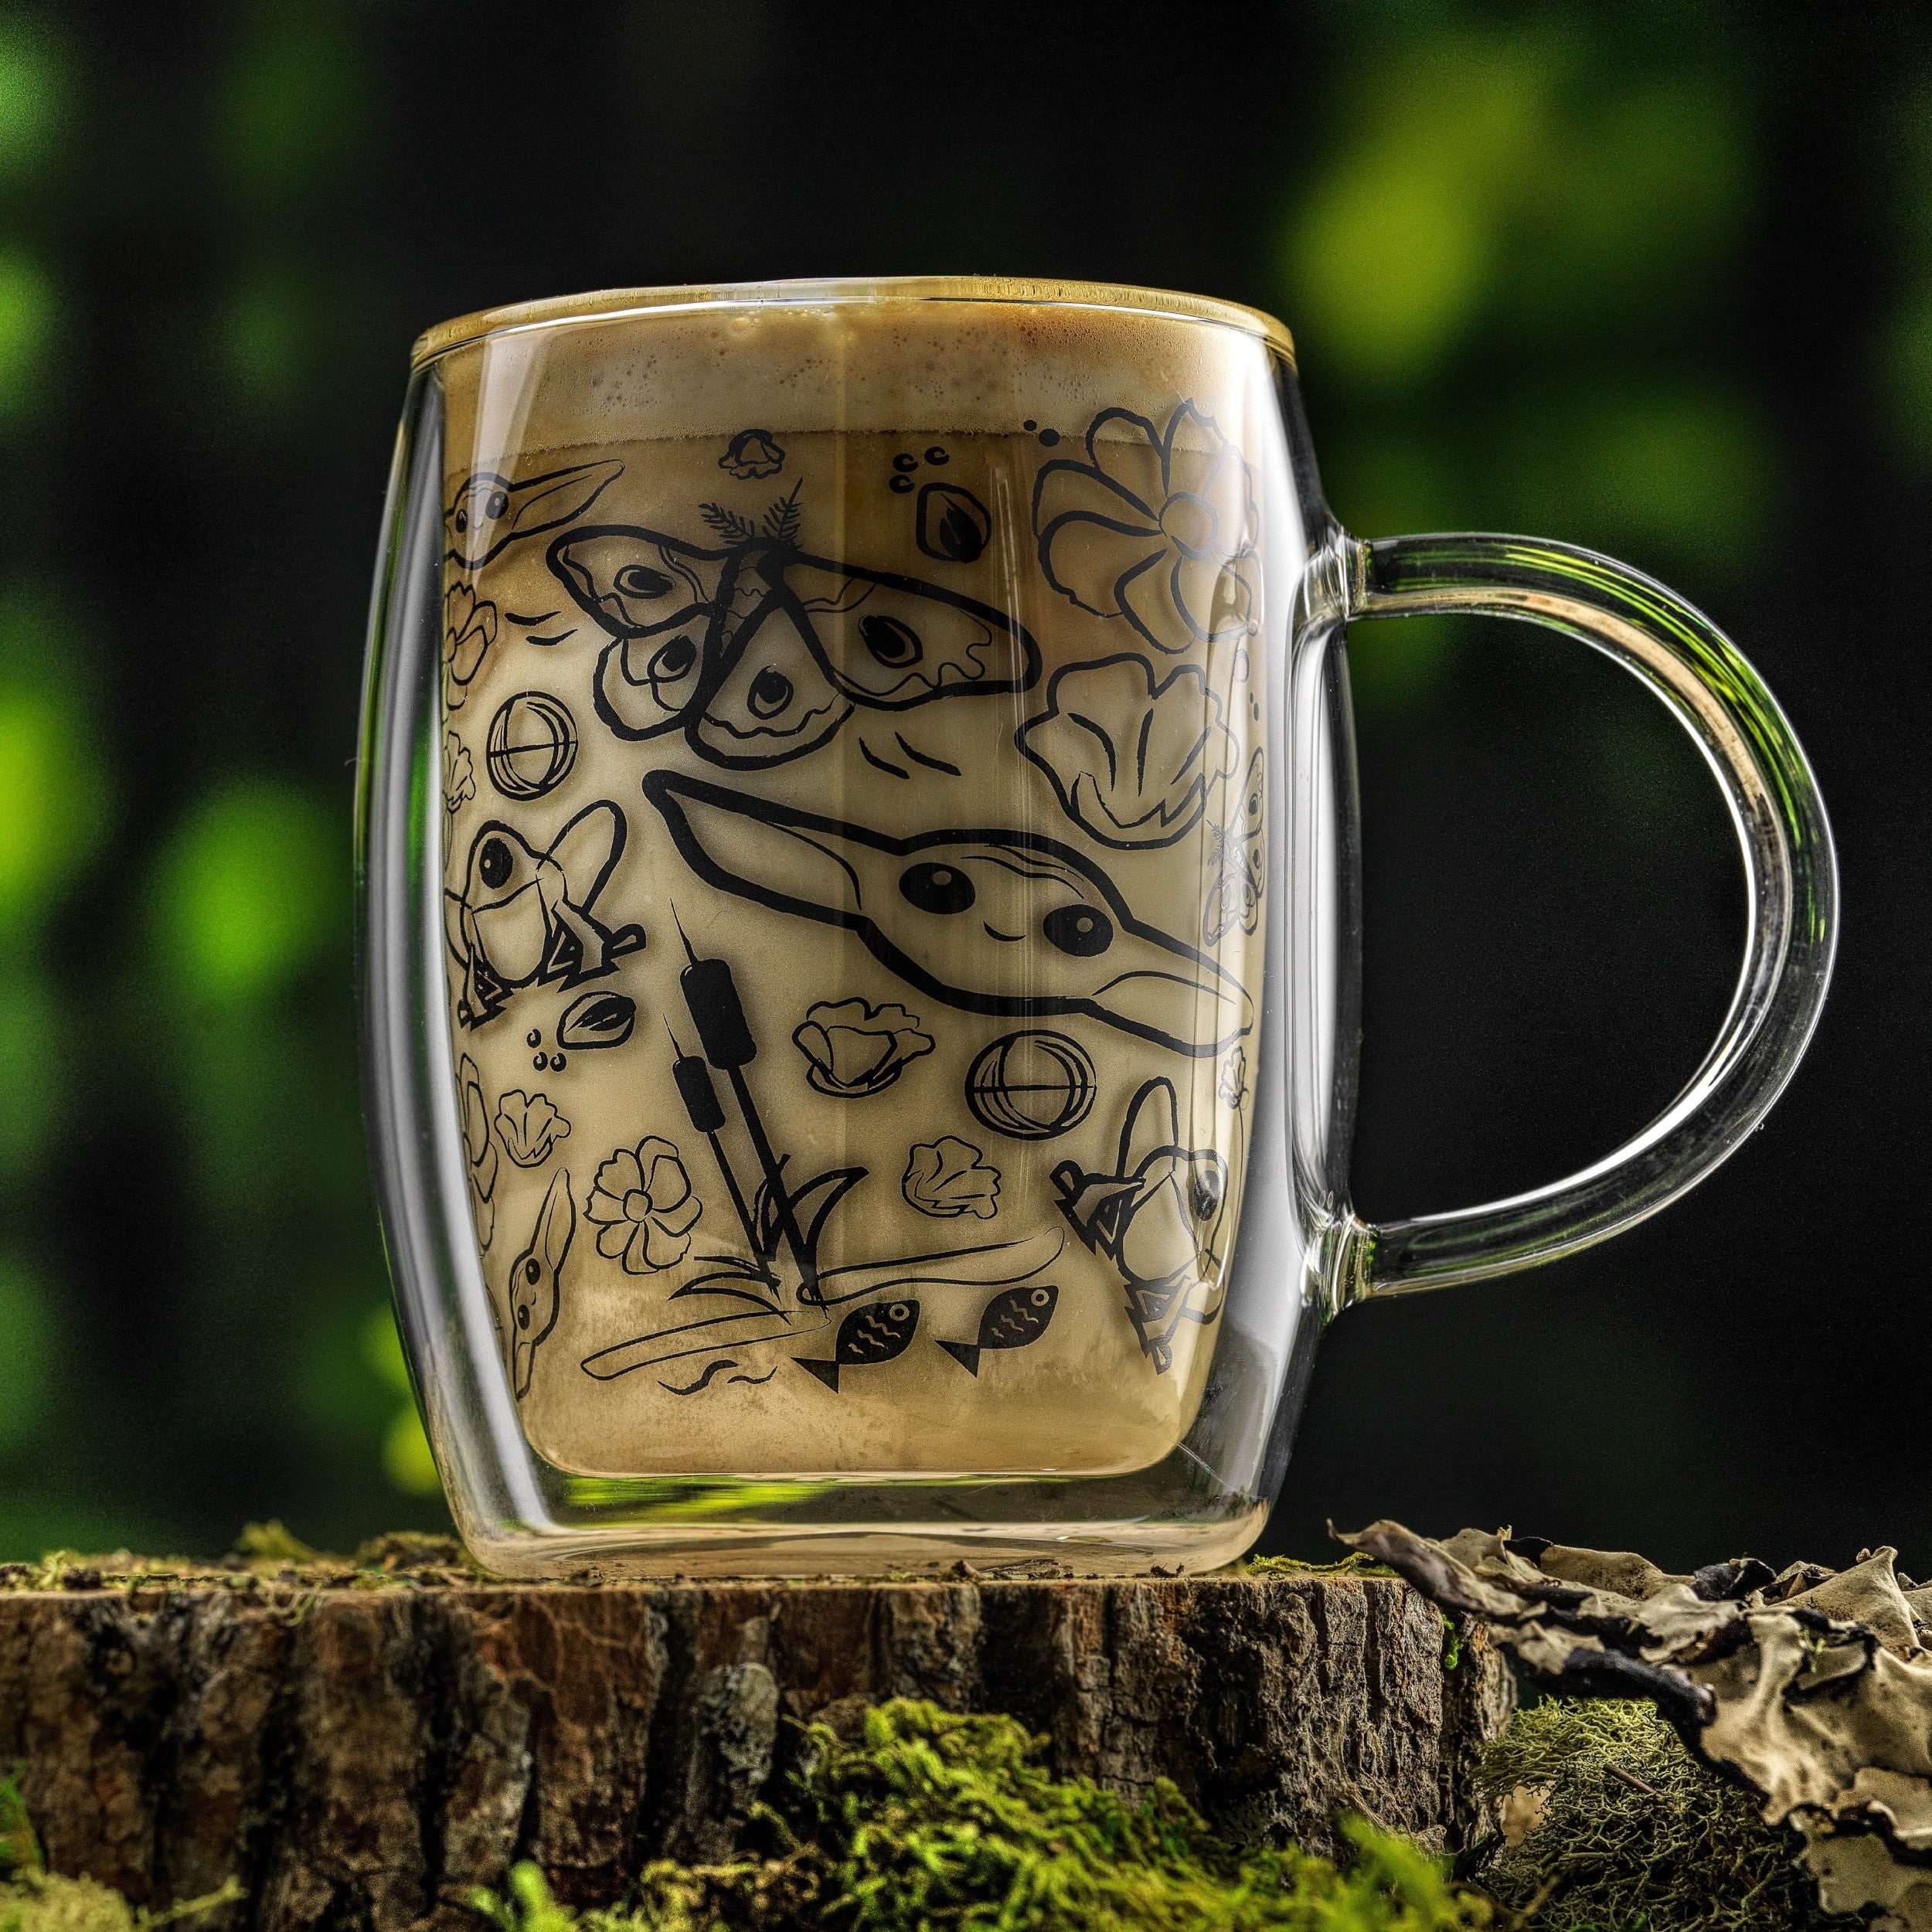 https://ak1.ostkcdn.com/images/products/is/images/direct/cd1bb5a34695fc85c2f8011bb8bfd35ee5ff774a/Star-Wars-Mandalorian-The-Child-All-Around-Glass-Mugs-13.5-oz-Set-of-2.jpg